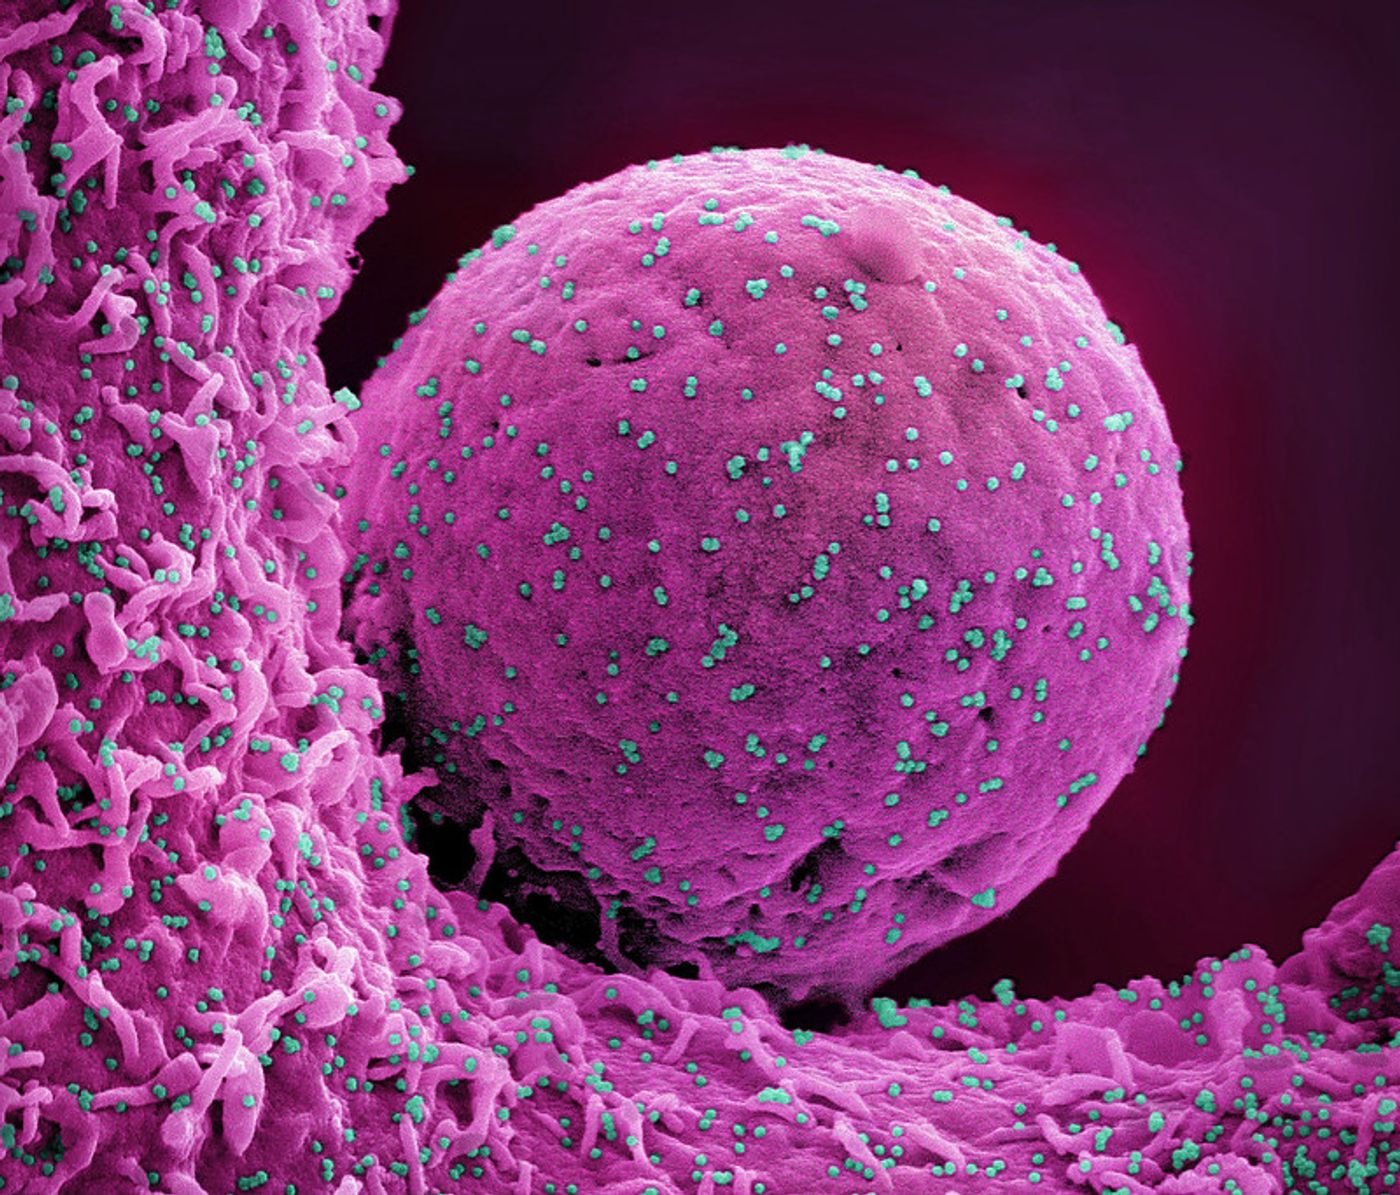 Colorized scanning electron micrograph of a cell (pink) infected with the Omicron strain of SARS-CoV-2 virus particles (teal), isolated from a patient sample. Image captured at the NIAID Integrated Research Facility (IRF) in Fort Detrick, Maryland. Credit: NIAID